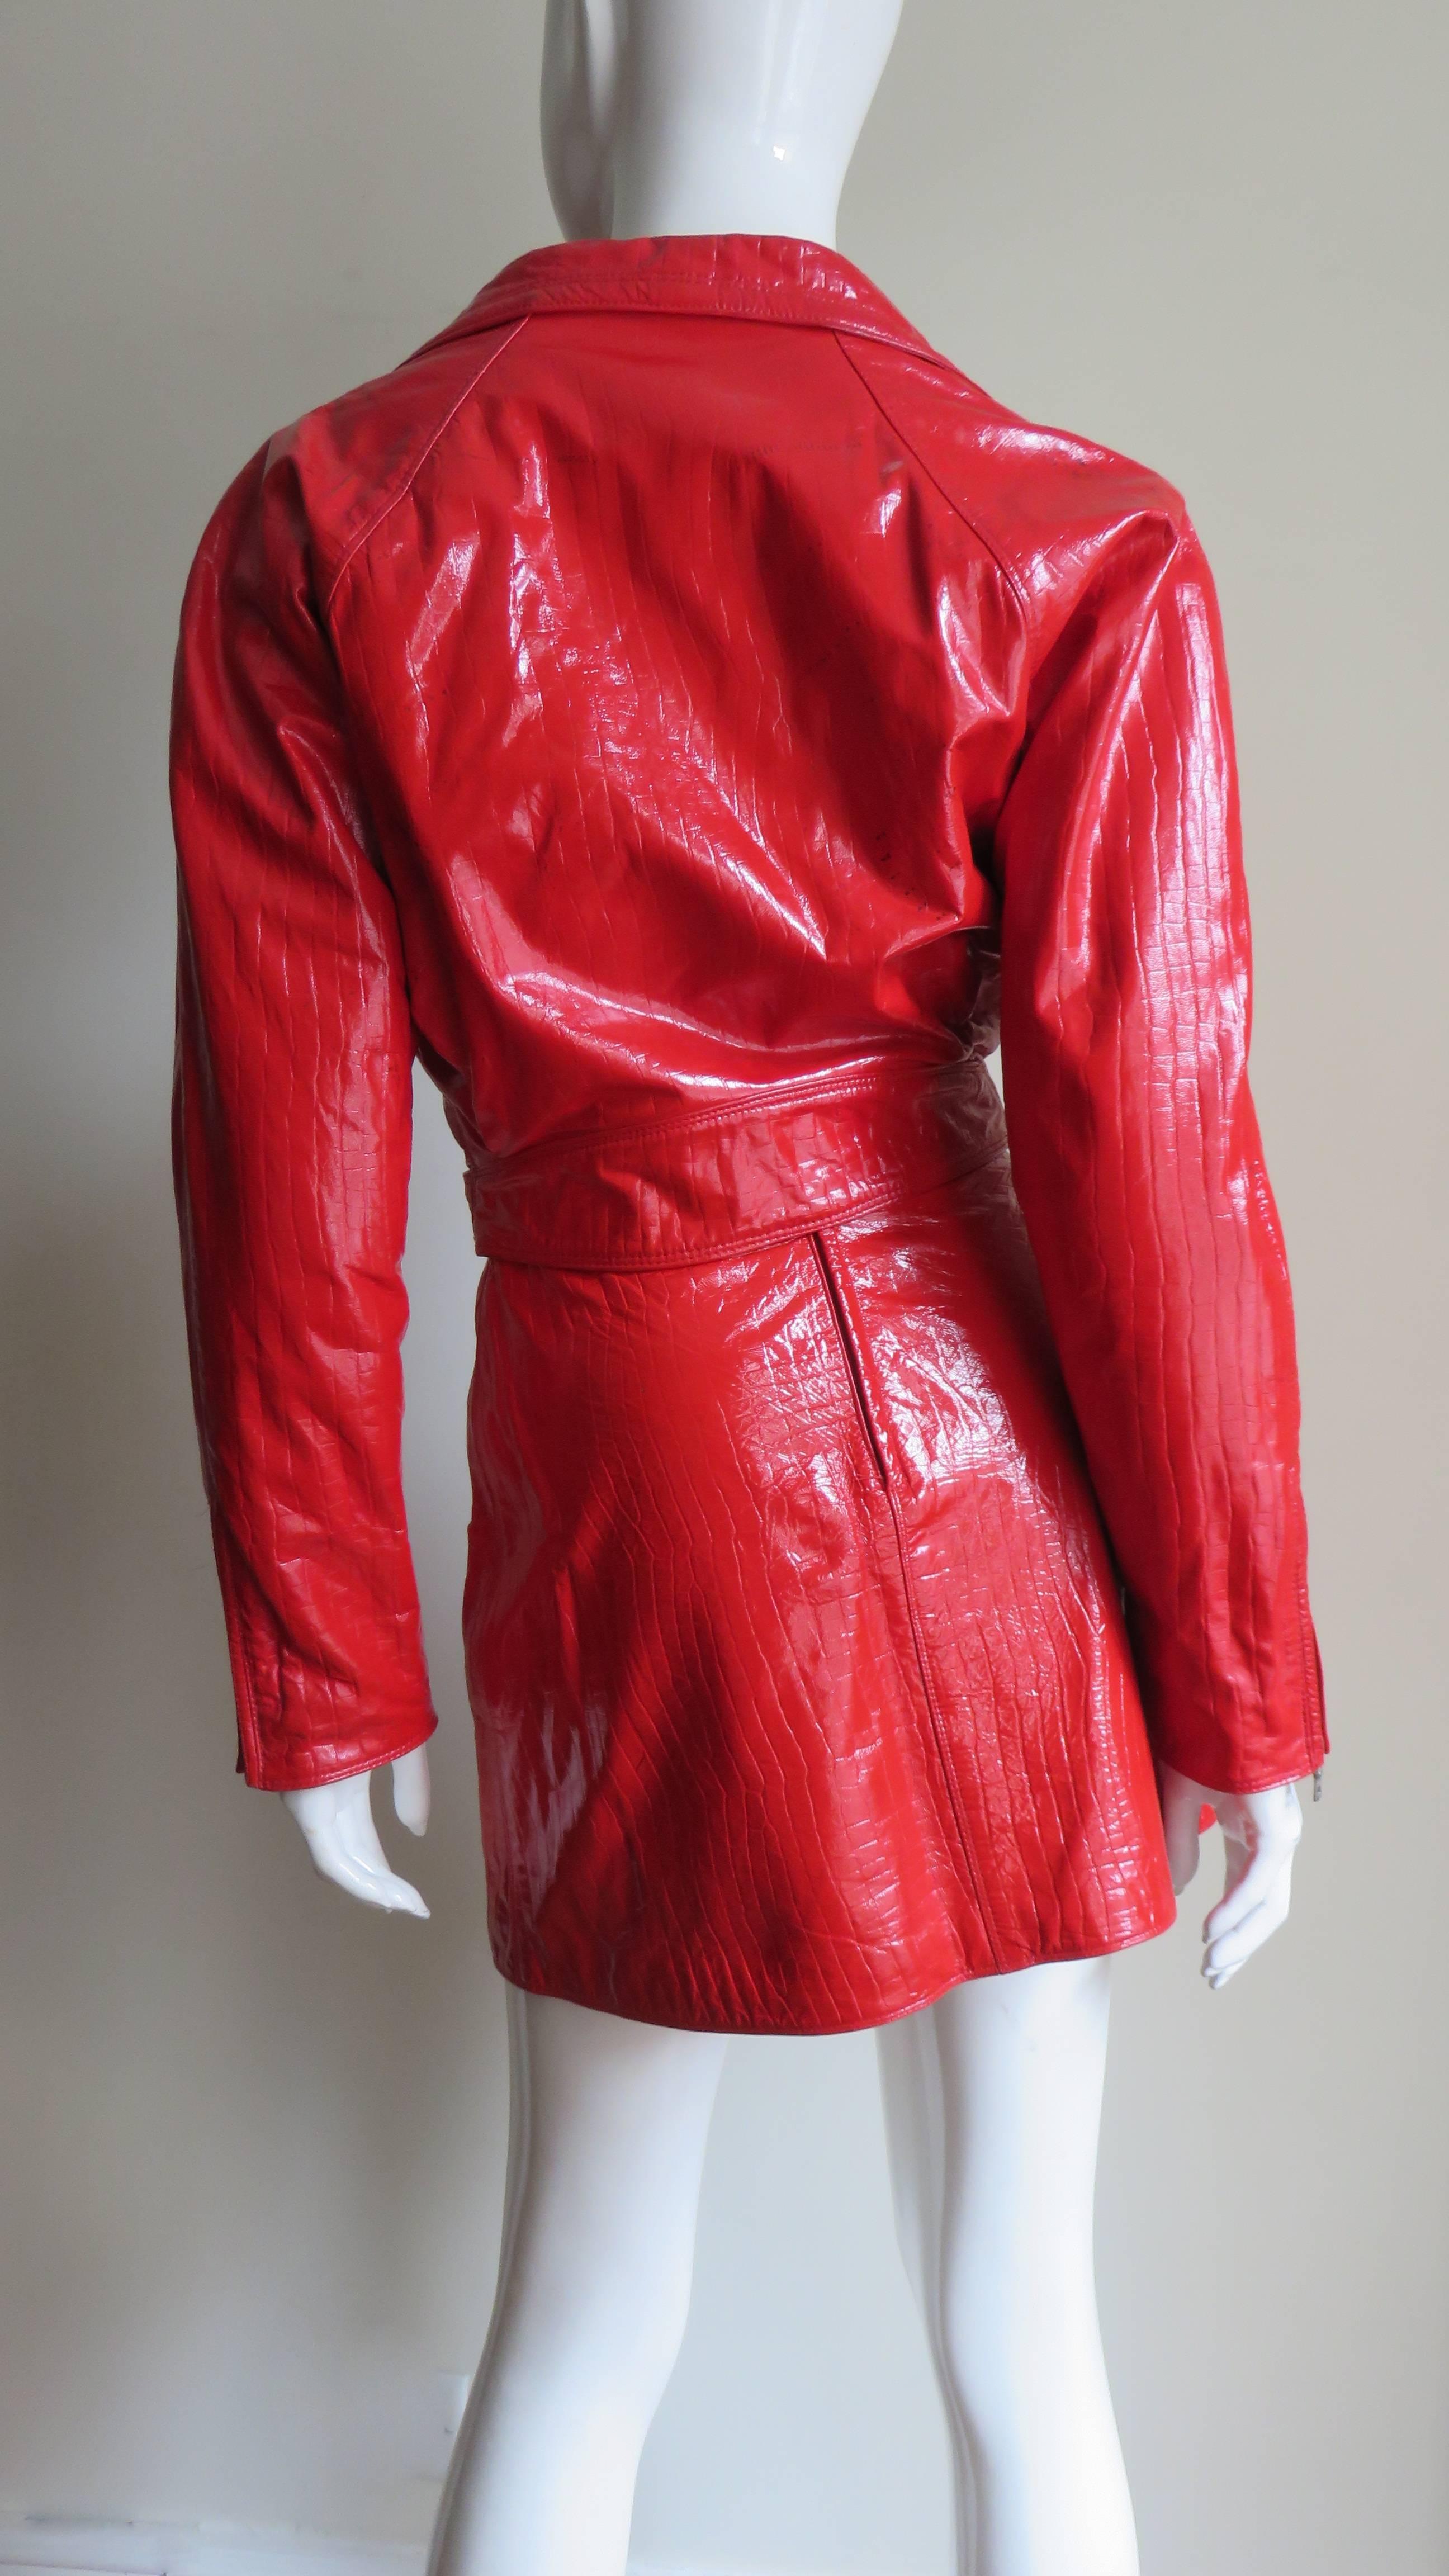 Gianni Versace Red Leather Motorcycle Jacket and Skirt A/W 1994 For Sale 2